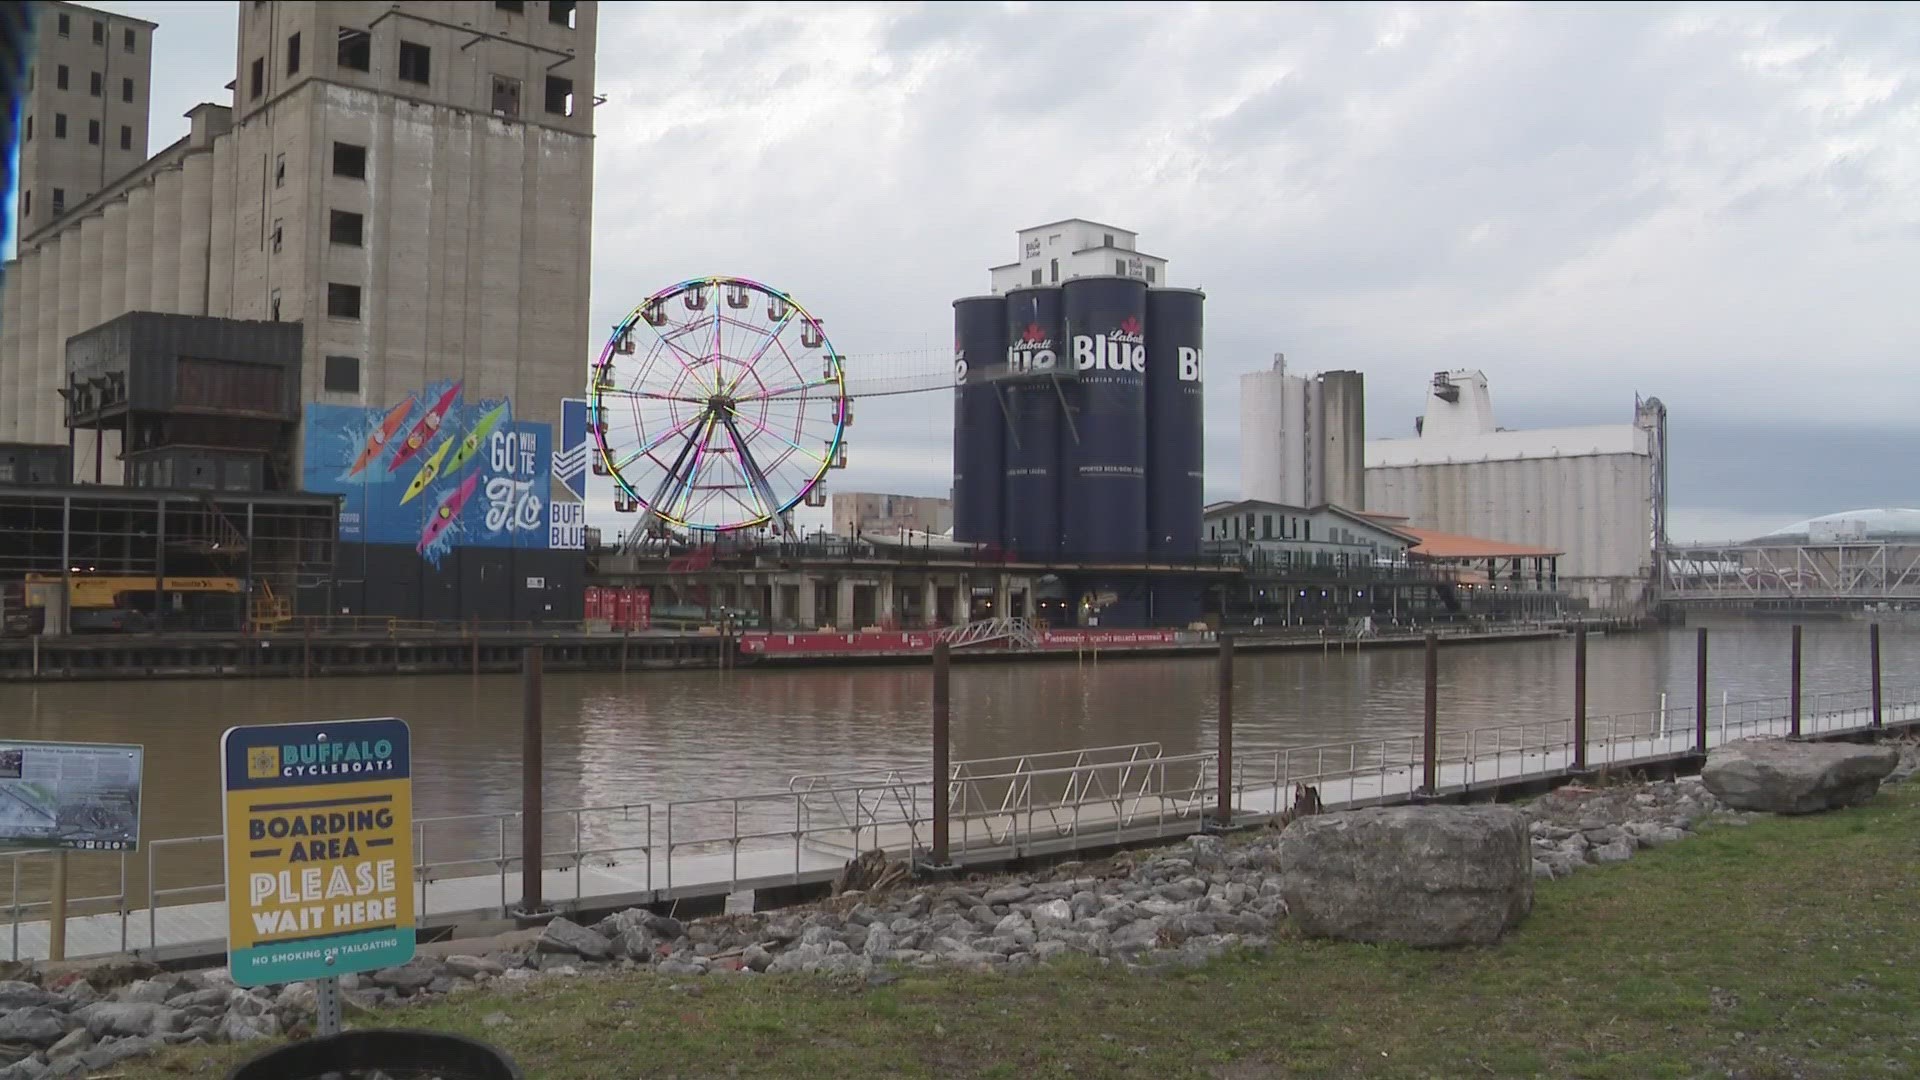 Buffalo RiverWorks is expanding its campus with a $2.7 million project that includes a new thrill ride and a virtual reality attraction.